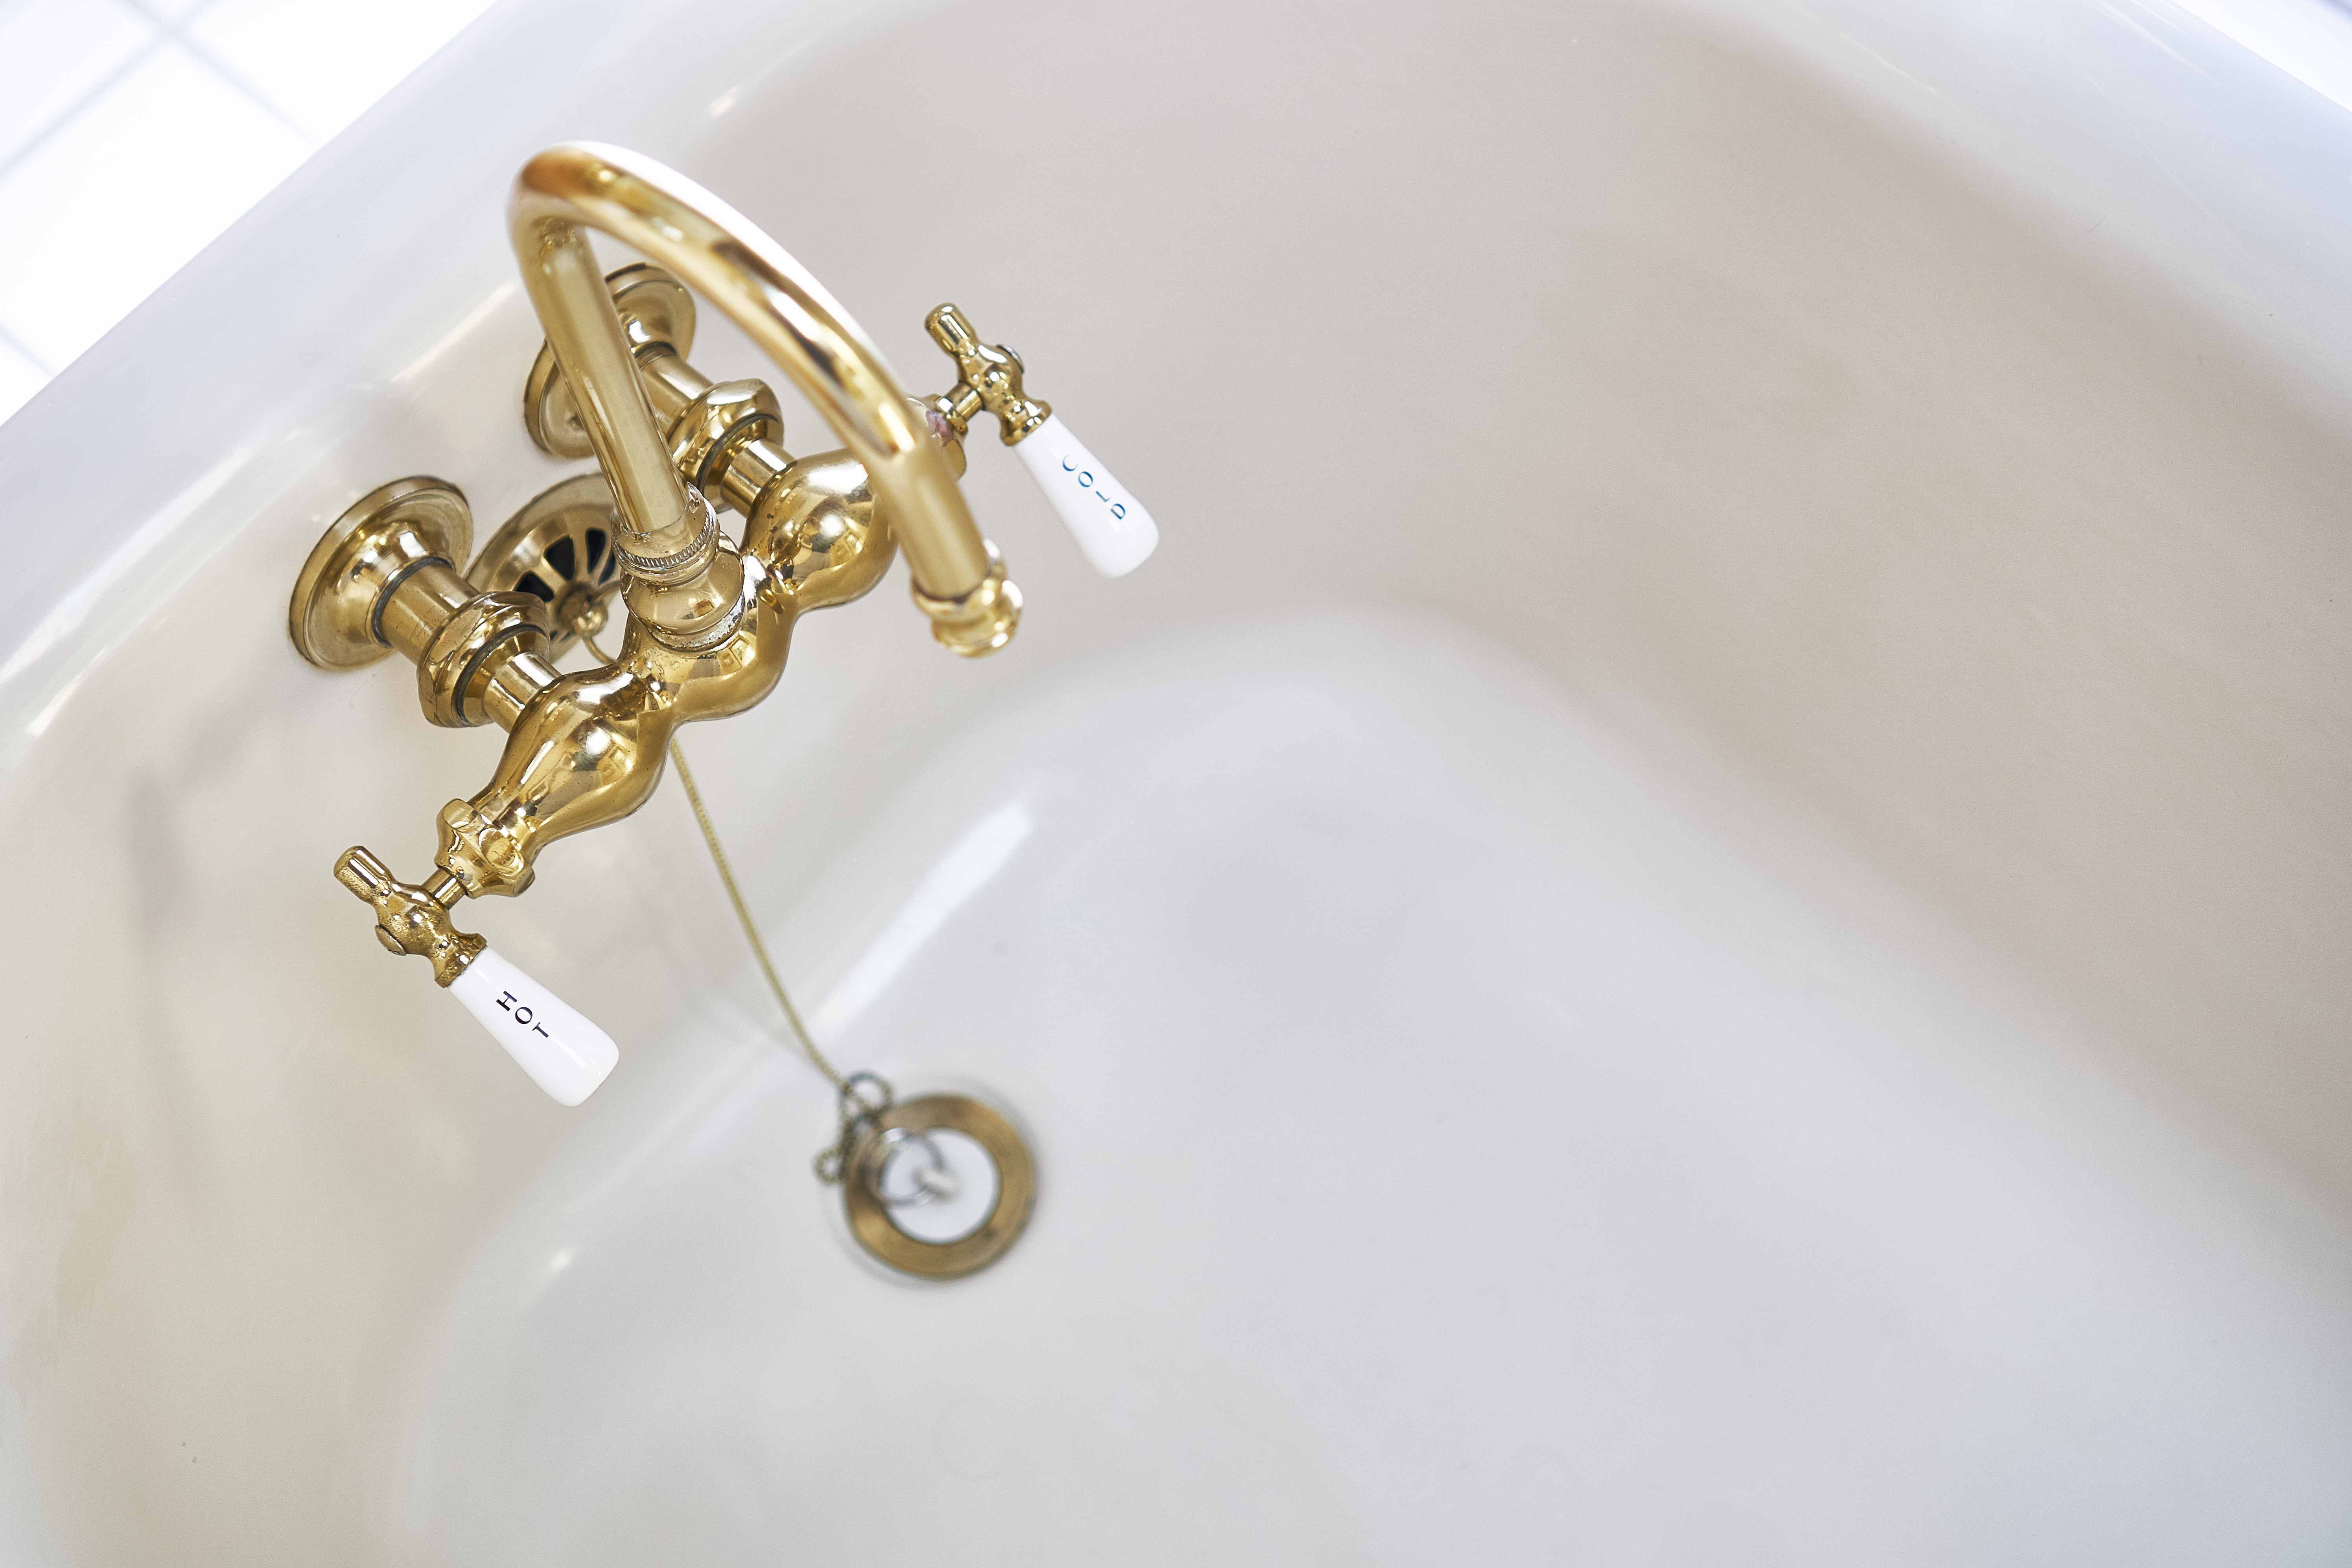 Unlock the Mystery: How to Replace Bathtub Drain Stopper?